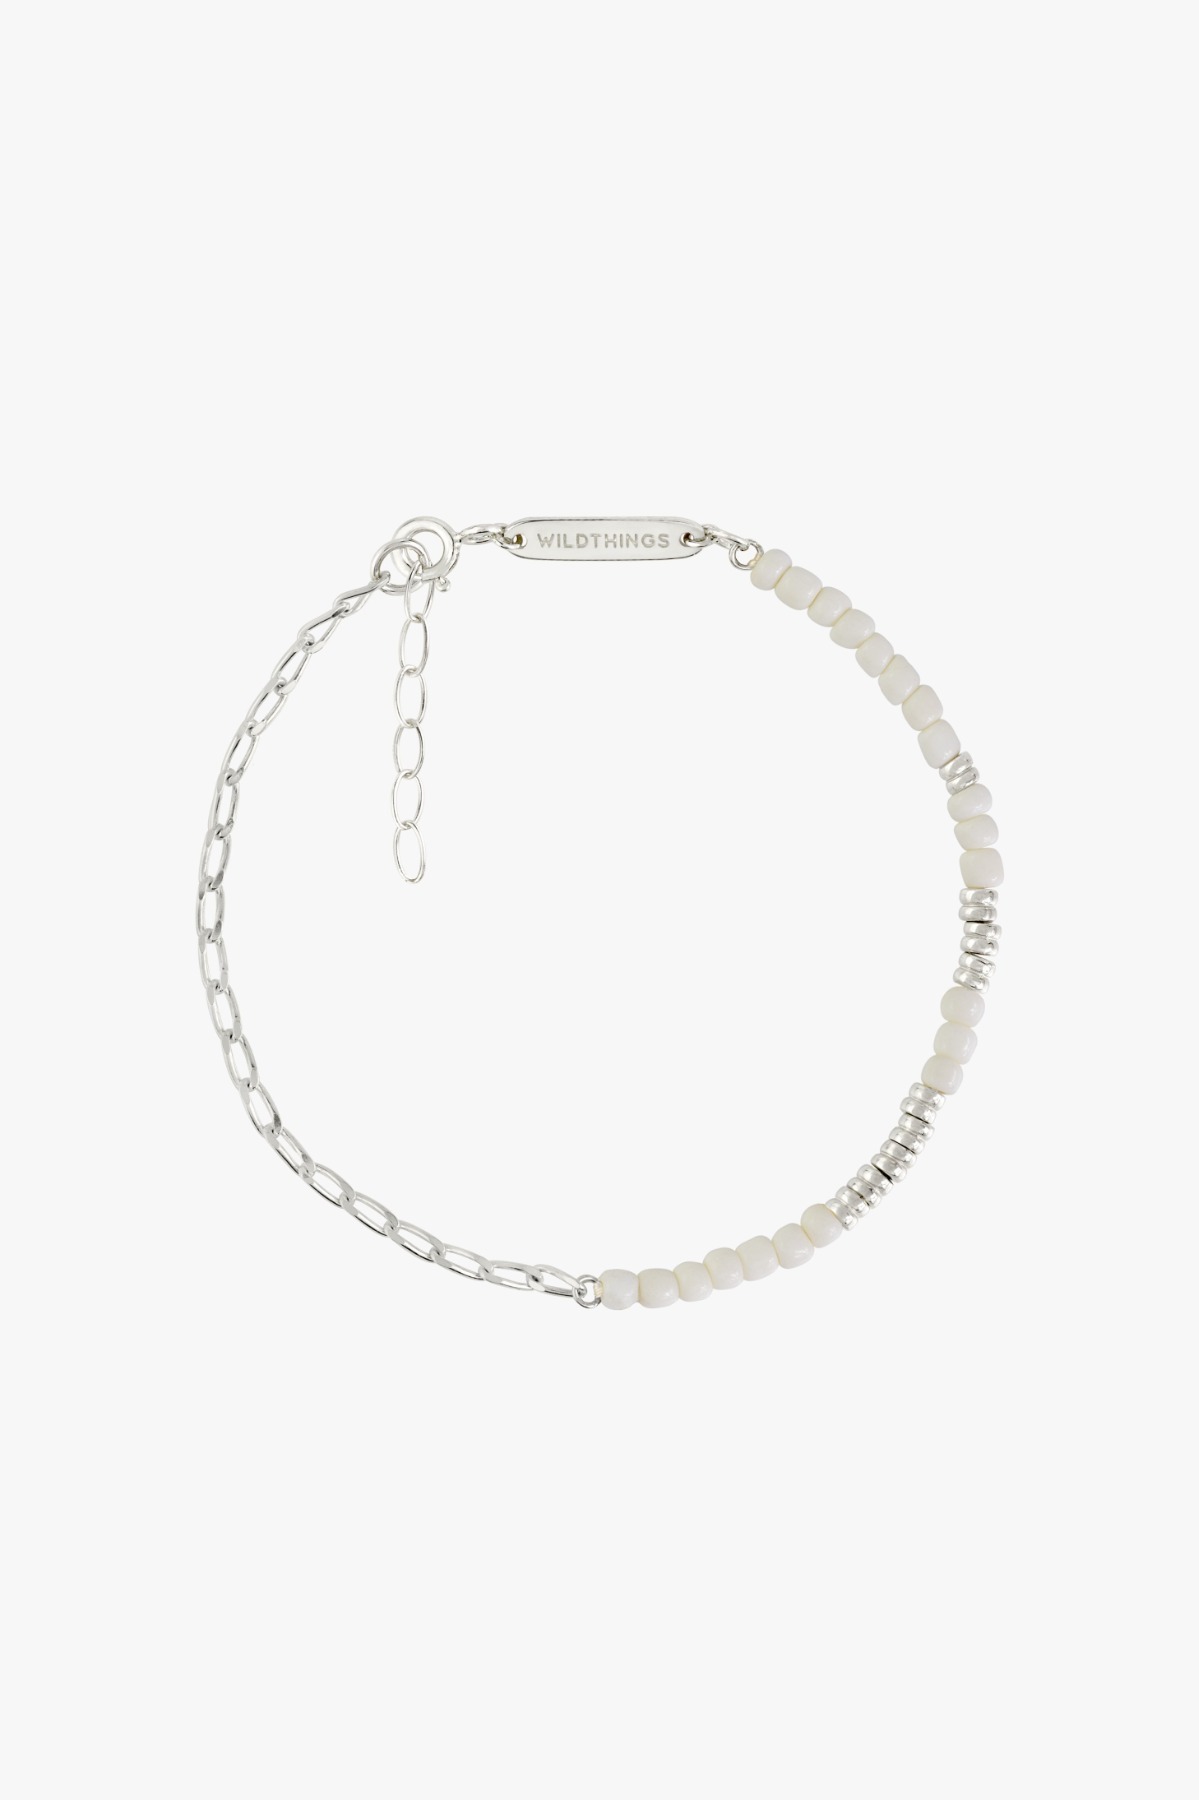 wildthings collectables - Think twice chain bracelet white silver